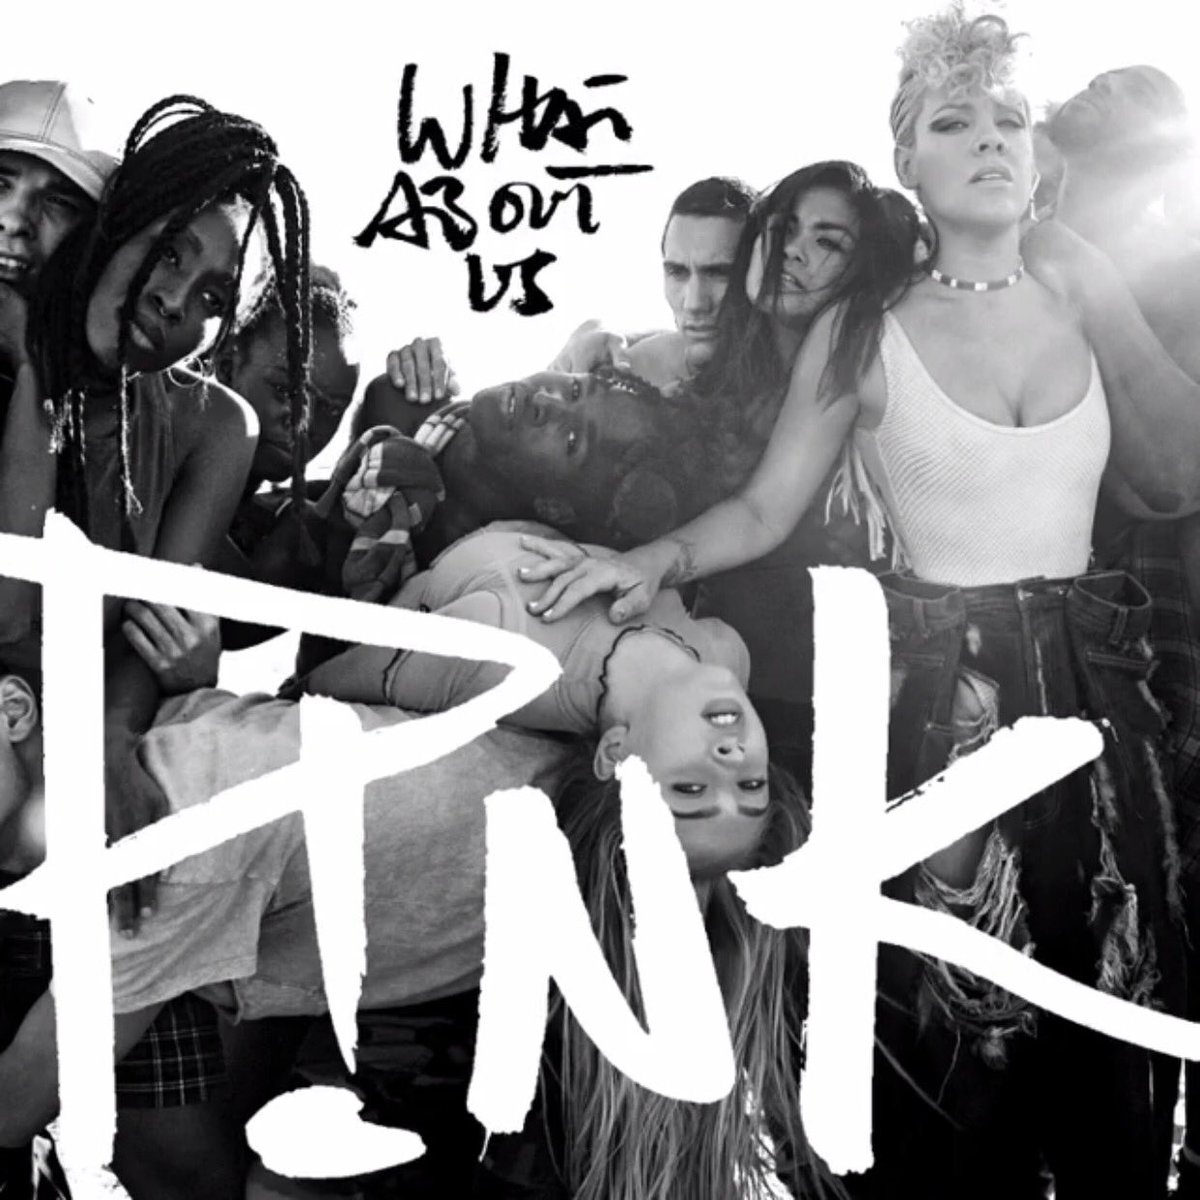 What About Us(P!nk 演唱歌曲)